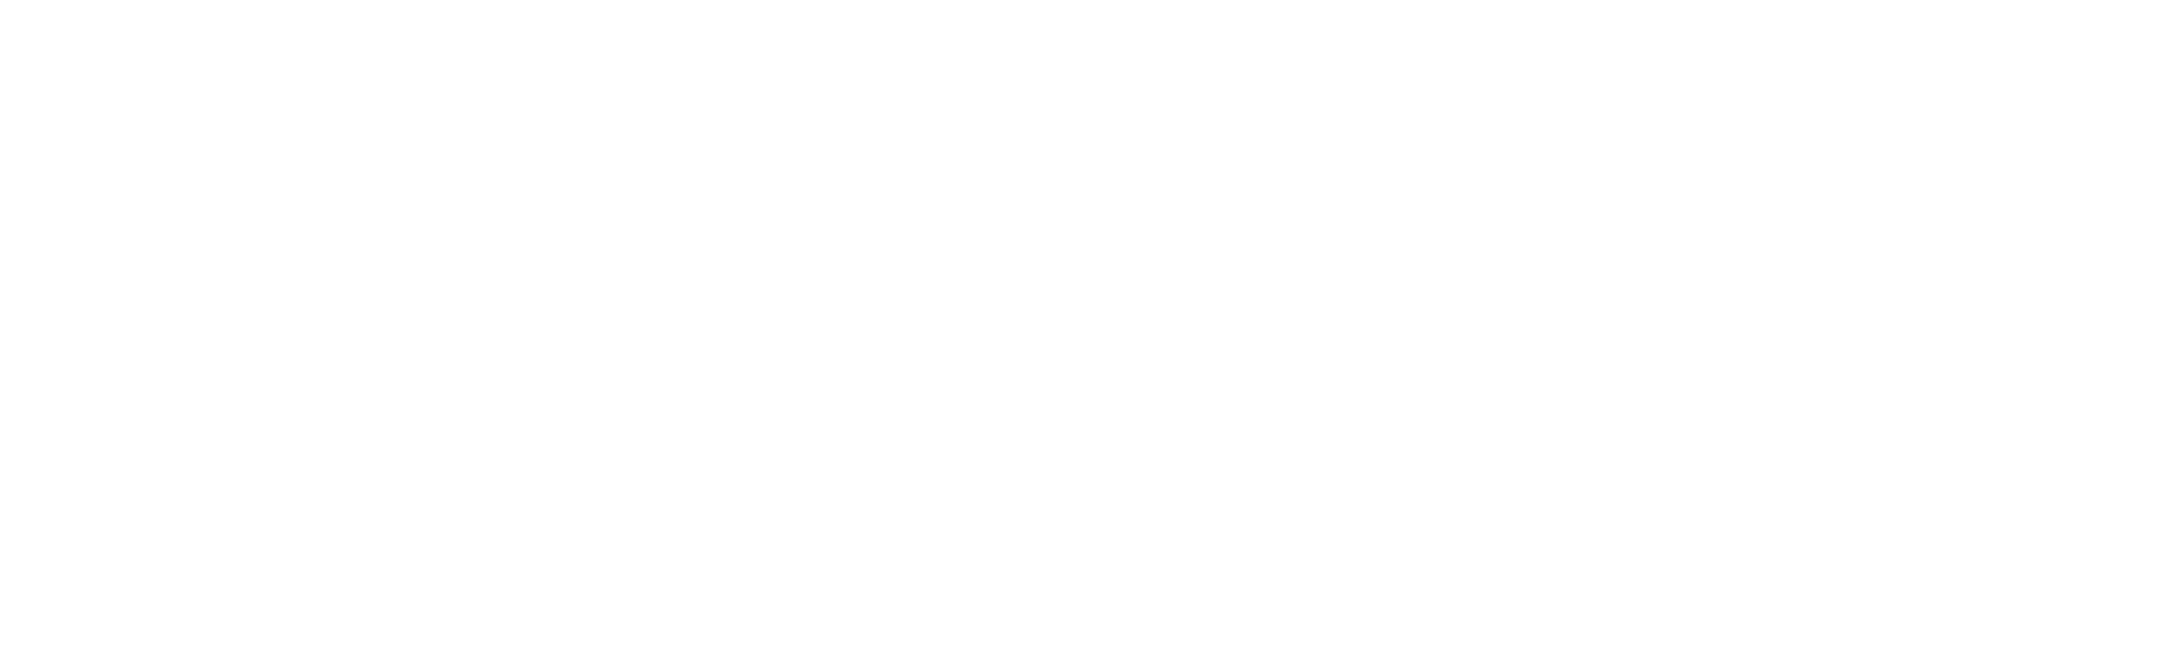 Prism systems logo white.png